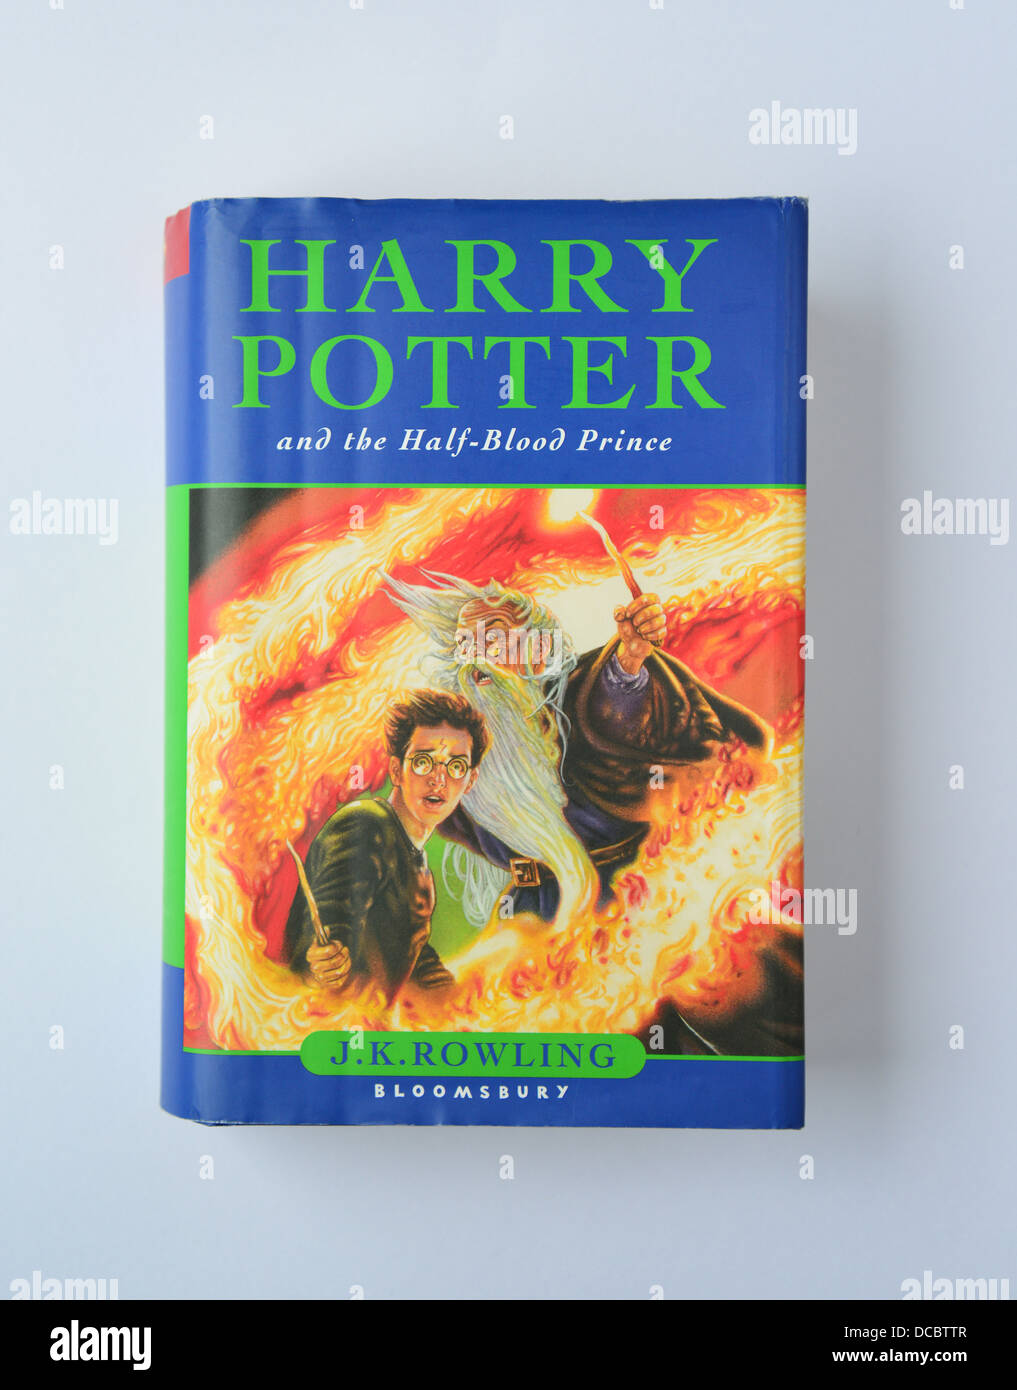 J.K.Rowling's 'Harry Potter and the Half-Blood Prince' book, Surrey, England, United Kingdom Stock Photo